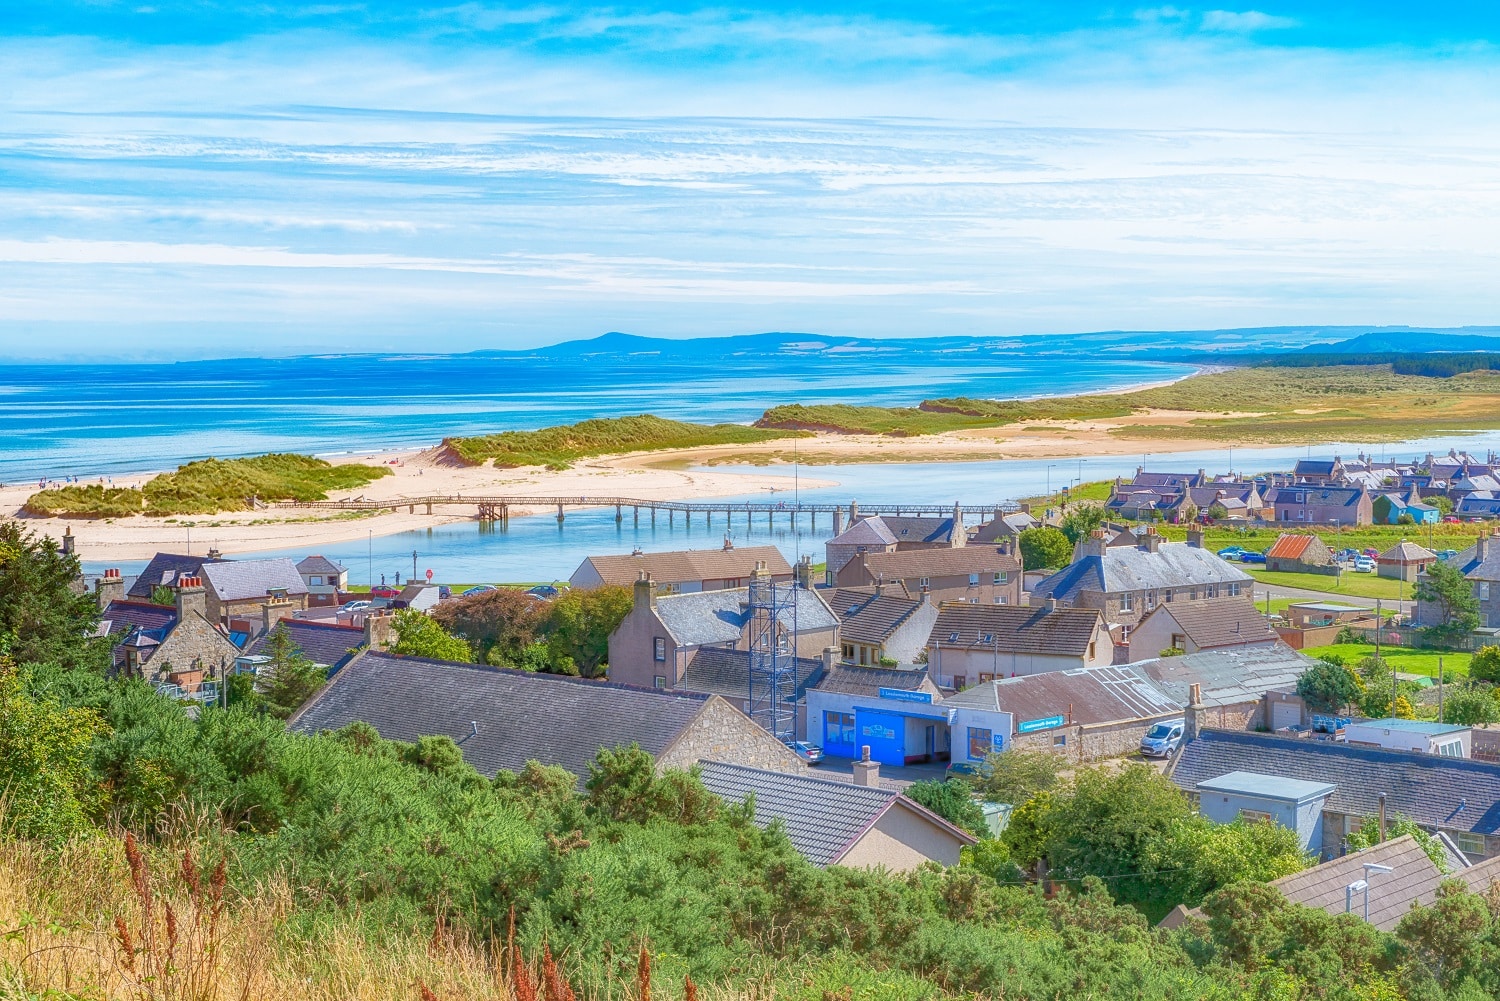 Lossiemouth the Jewel of Moray